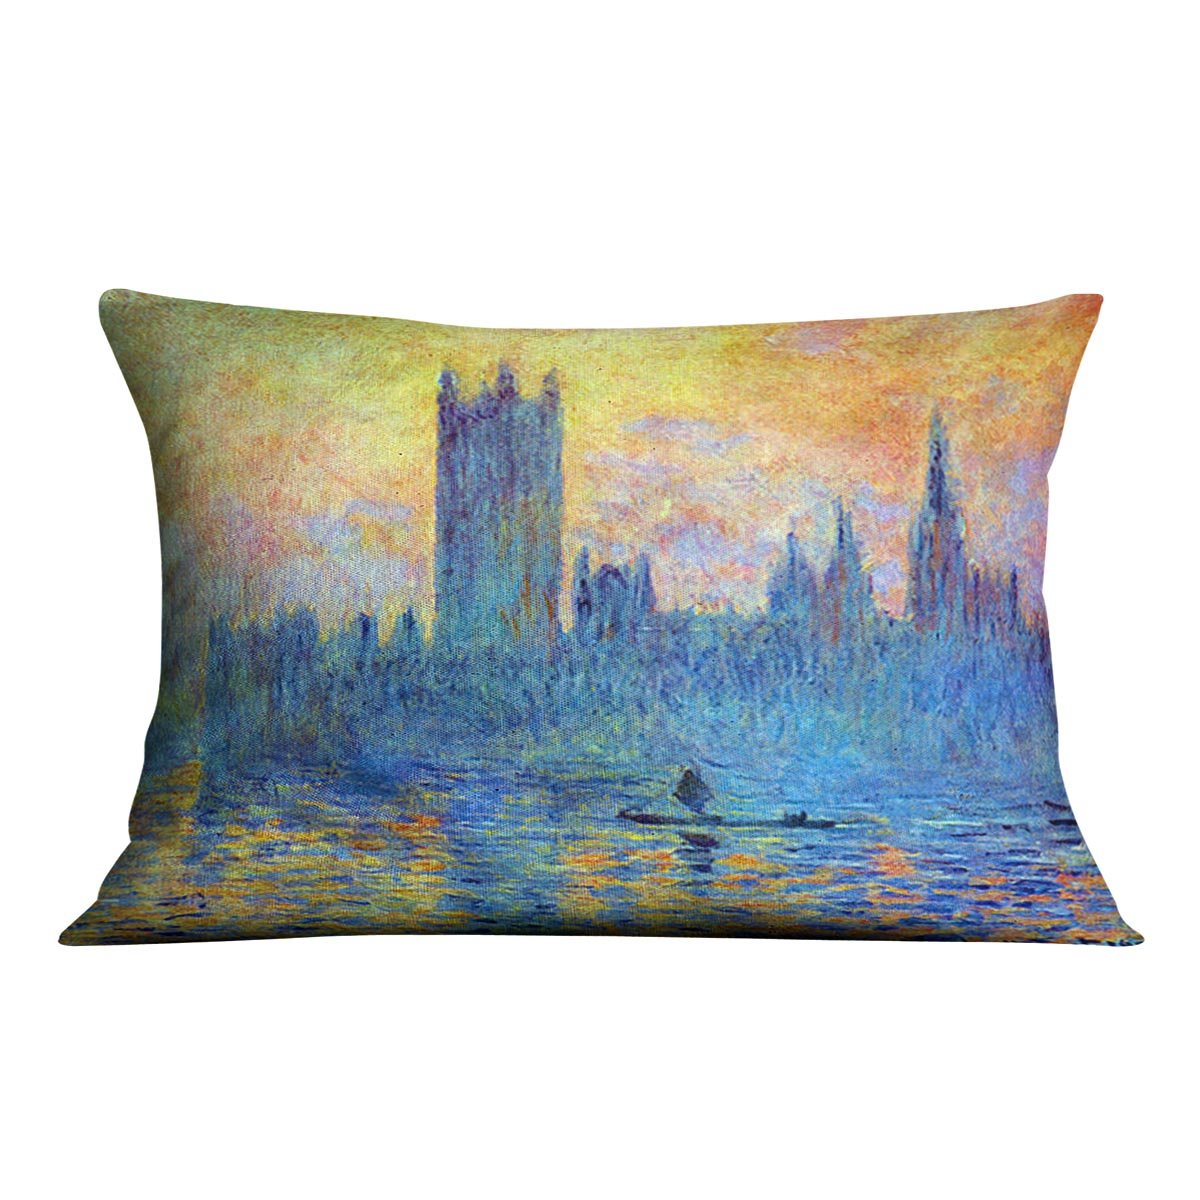 London Parliament in Winter by Monet Throw Pillow